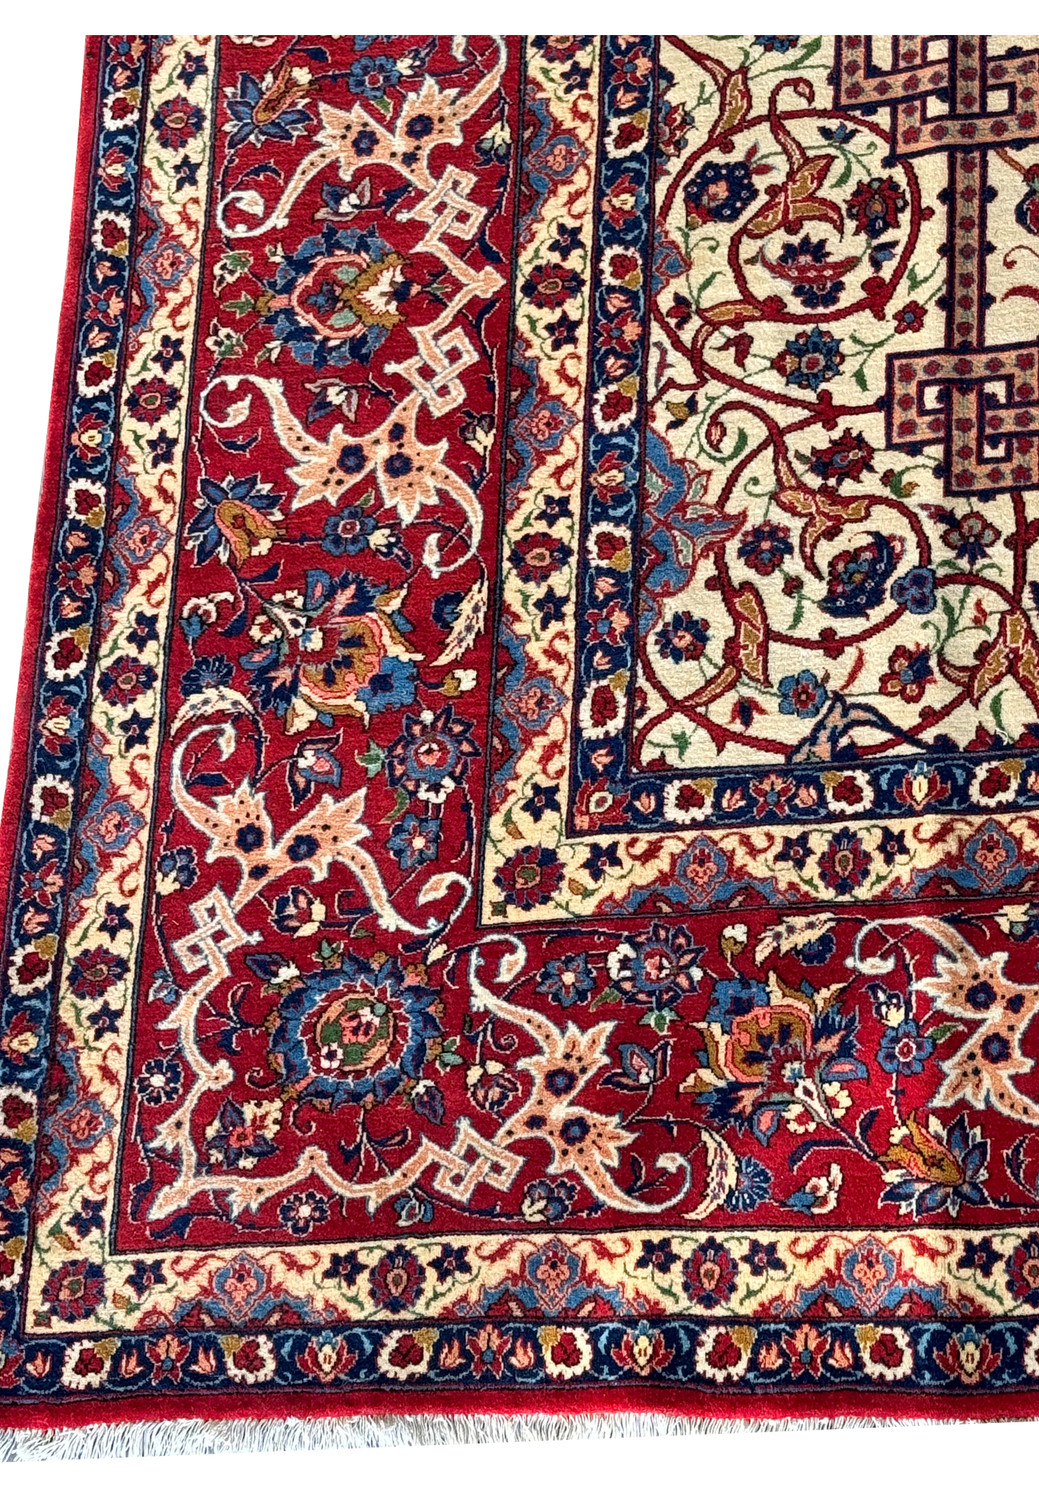 Close-up of the Persian Isfahan rug's edge, focusing on the fine details of the border patterns.